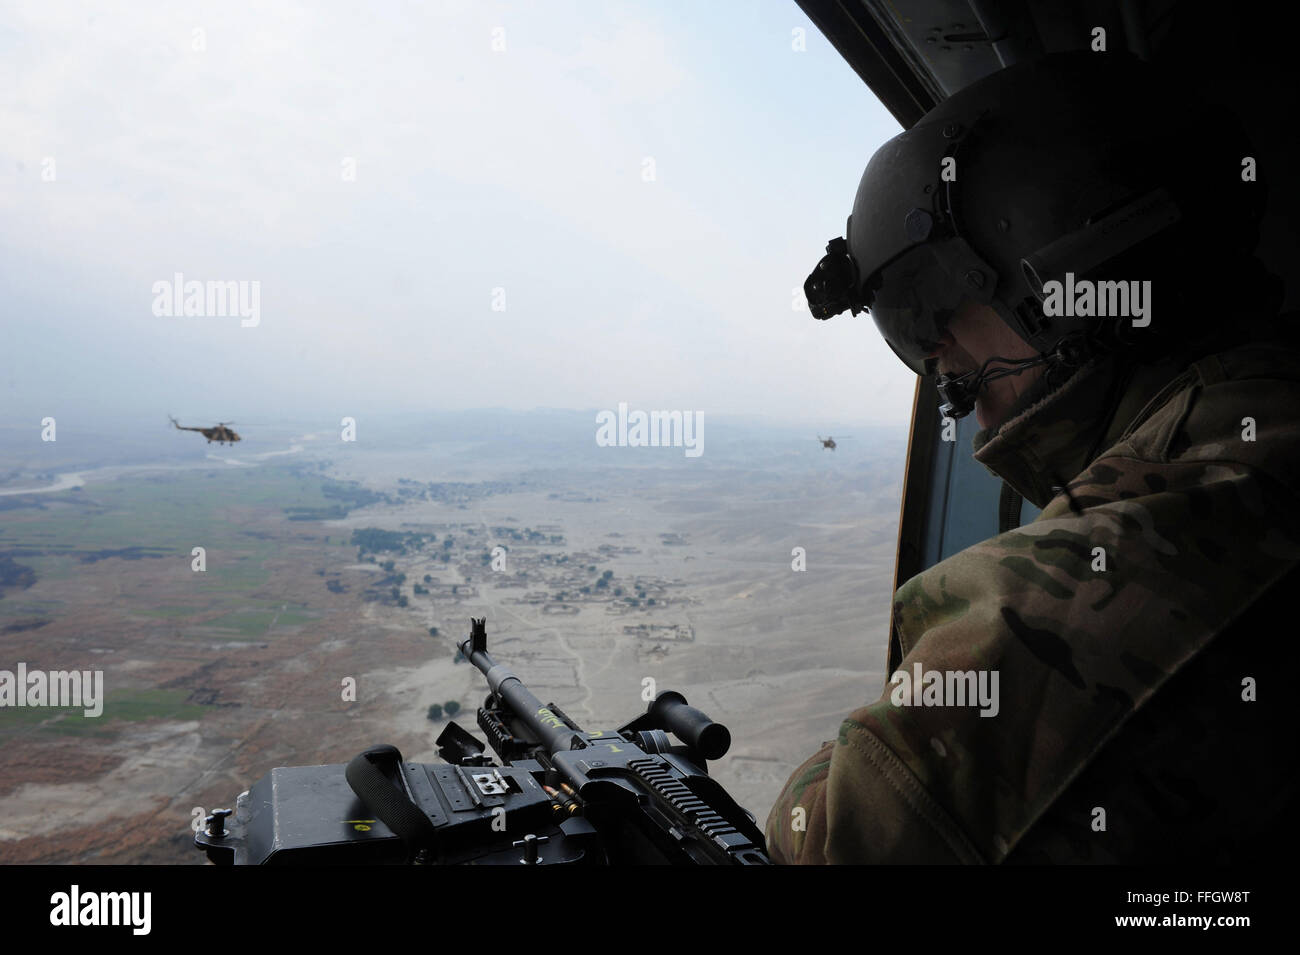 Senior Master Sgt. Todd Peplow, an aerial gunner with the 438th Air Expeditionary Advisory Squadron, provides gunner support on an Afghan air force MI-17 during a flight over Afghanistan. Peplow is currently deployed to provide advisory training for AAF flight engineers at Kabul International Airport. Stock Photo